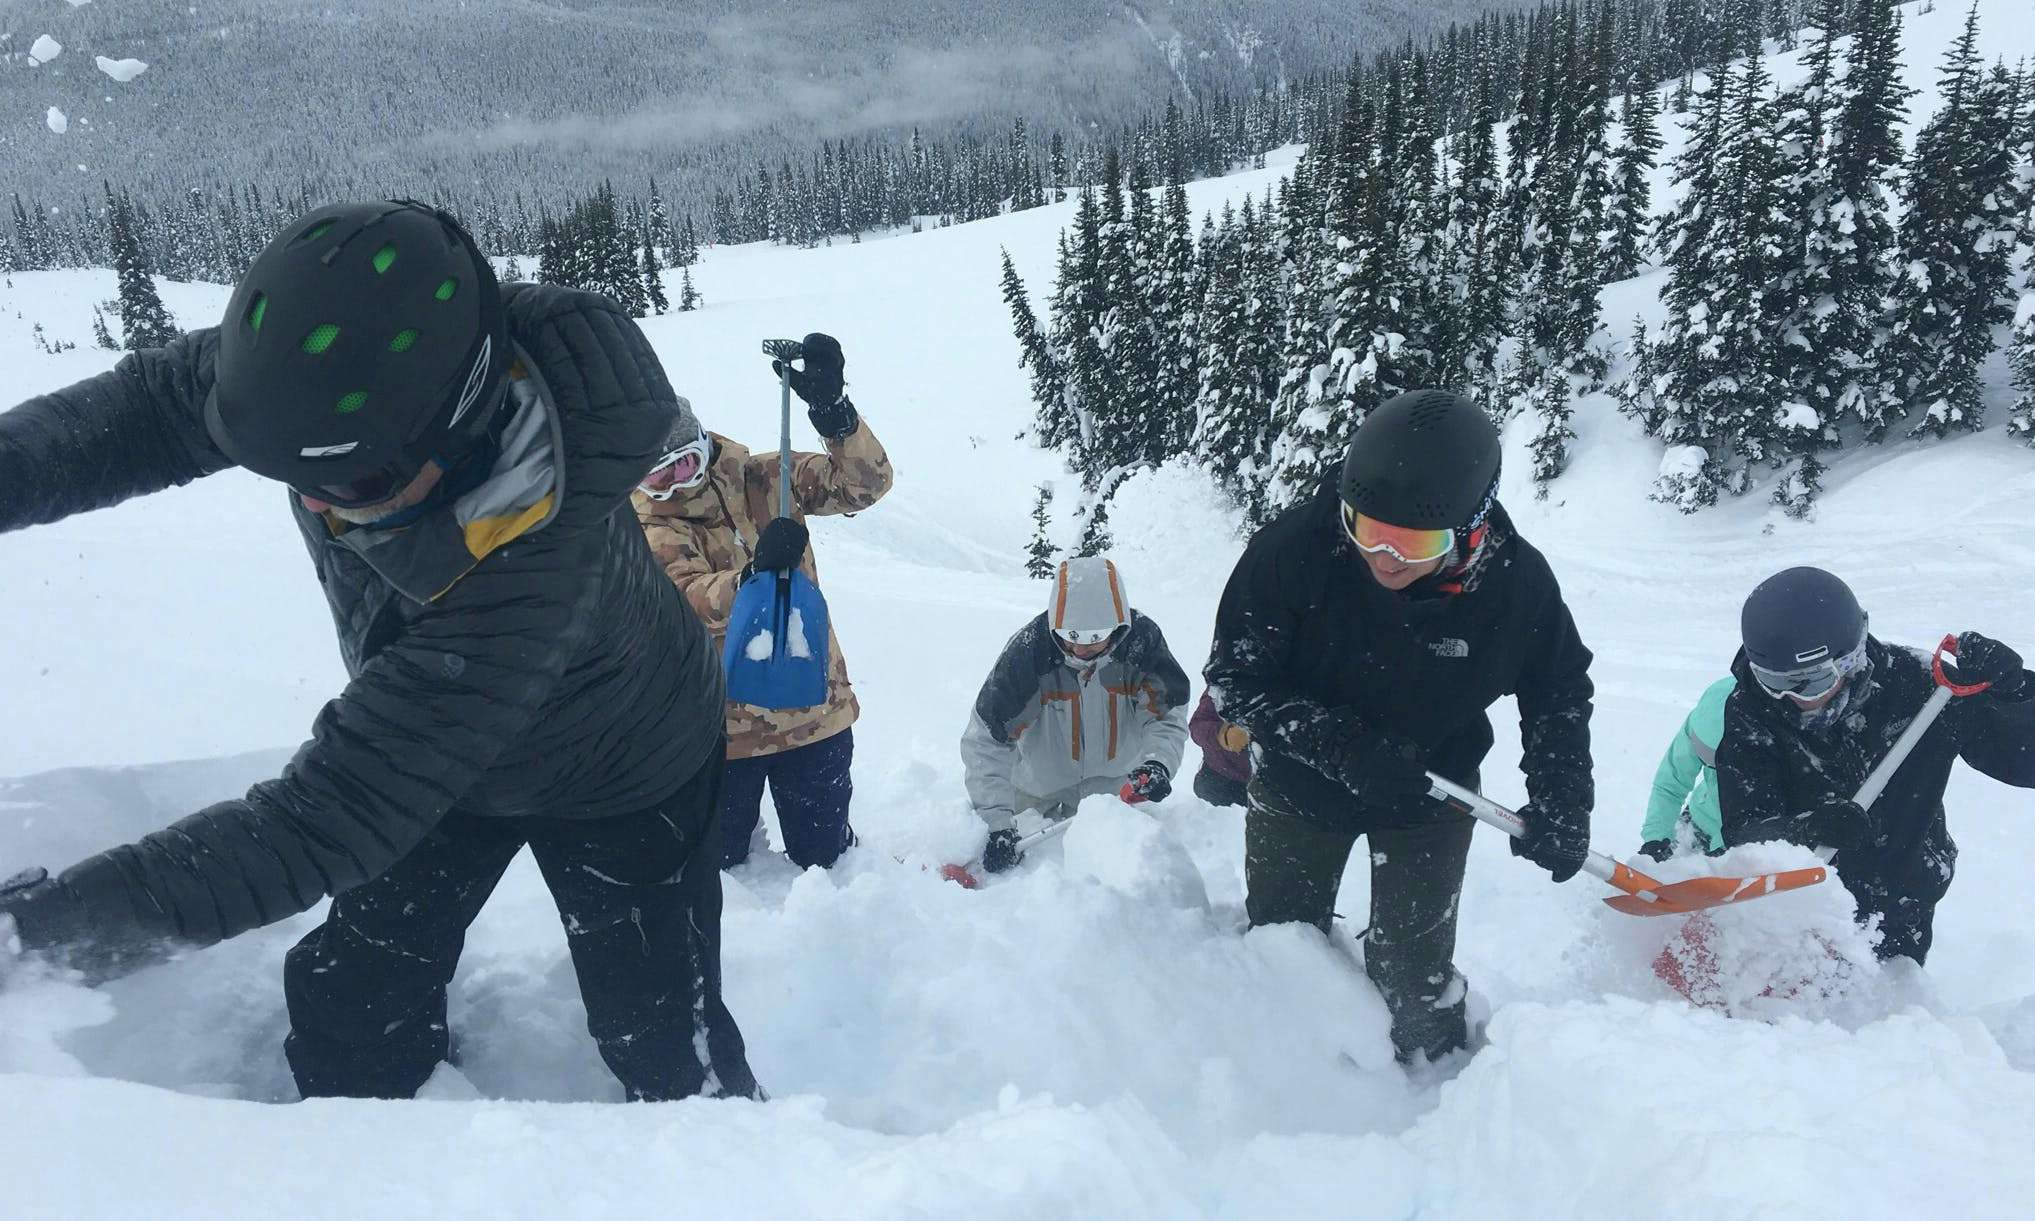 Proper shovelling technique as a group is just one of the skills you learn in training.